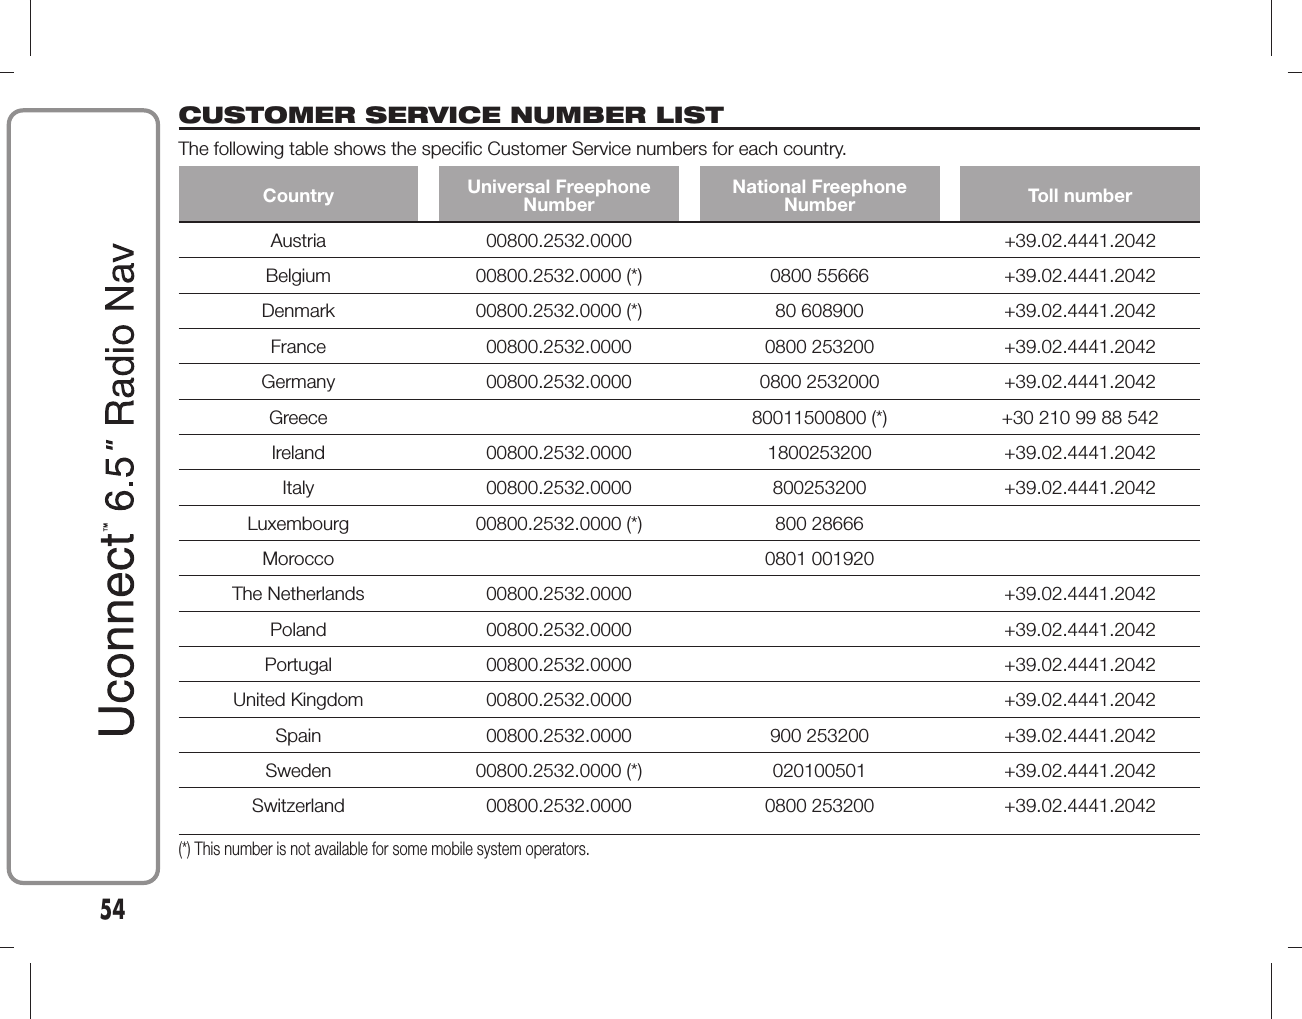 CUSTOMER SERVICE NUMBER LISTThe following table shows the specific Customer Service numbers for each country.Country Universal FreephoneNumberNational FreephoneNumber Toll numberAustria 00800.2532.0000 +39.02.4441.2042Belgium 00800.2532.0000 (*) 0800 55666 +39.02.4441.2042Denmark 00800.2532.0000 (*) 80 608900 +39.02.4441.2042France 00800.2532.0000 0800 253200 +39.02.4441.2042Germany 00800.2532.0000 0800 2532000 +39.02.4441.2042Greece 80011500800 (*) +30 210 99 88 542Ireland 00800.2532.0000 1800253200 +39.02.4441.2042Italy 00800.2532.0000 800253200 +39.02.4441.2042Luxembourg 00800.2532.0000 (*) 800 28666Morocco 0801 001920The Netherlands 00800.2532.0000 +39.02.4441.2042Poland 00800.2532.0000 +39.02.4441.2042Portugal 00800.2532.0000 +39.02.4441.2042United Kingdom 00800.2532.0000 +39.02.4441.2042Spain 00800.2532.0000 900 253200 +39.02.4441.2042Sweden 00800.2532.0000 (*) 020100501 +39.02.4441.2042Switzerland 00800.2532.0000 0800 253200 +39.02.4441.2042(*) This number is not available for some mobile system operators.54